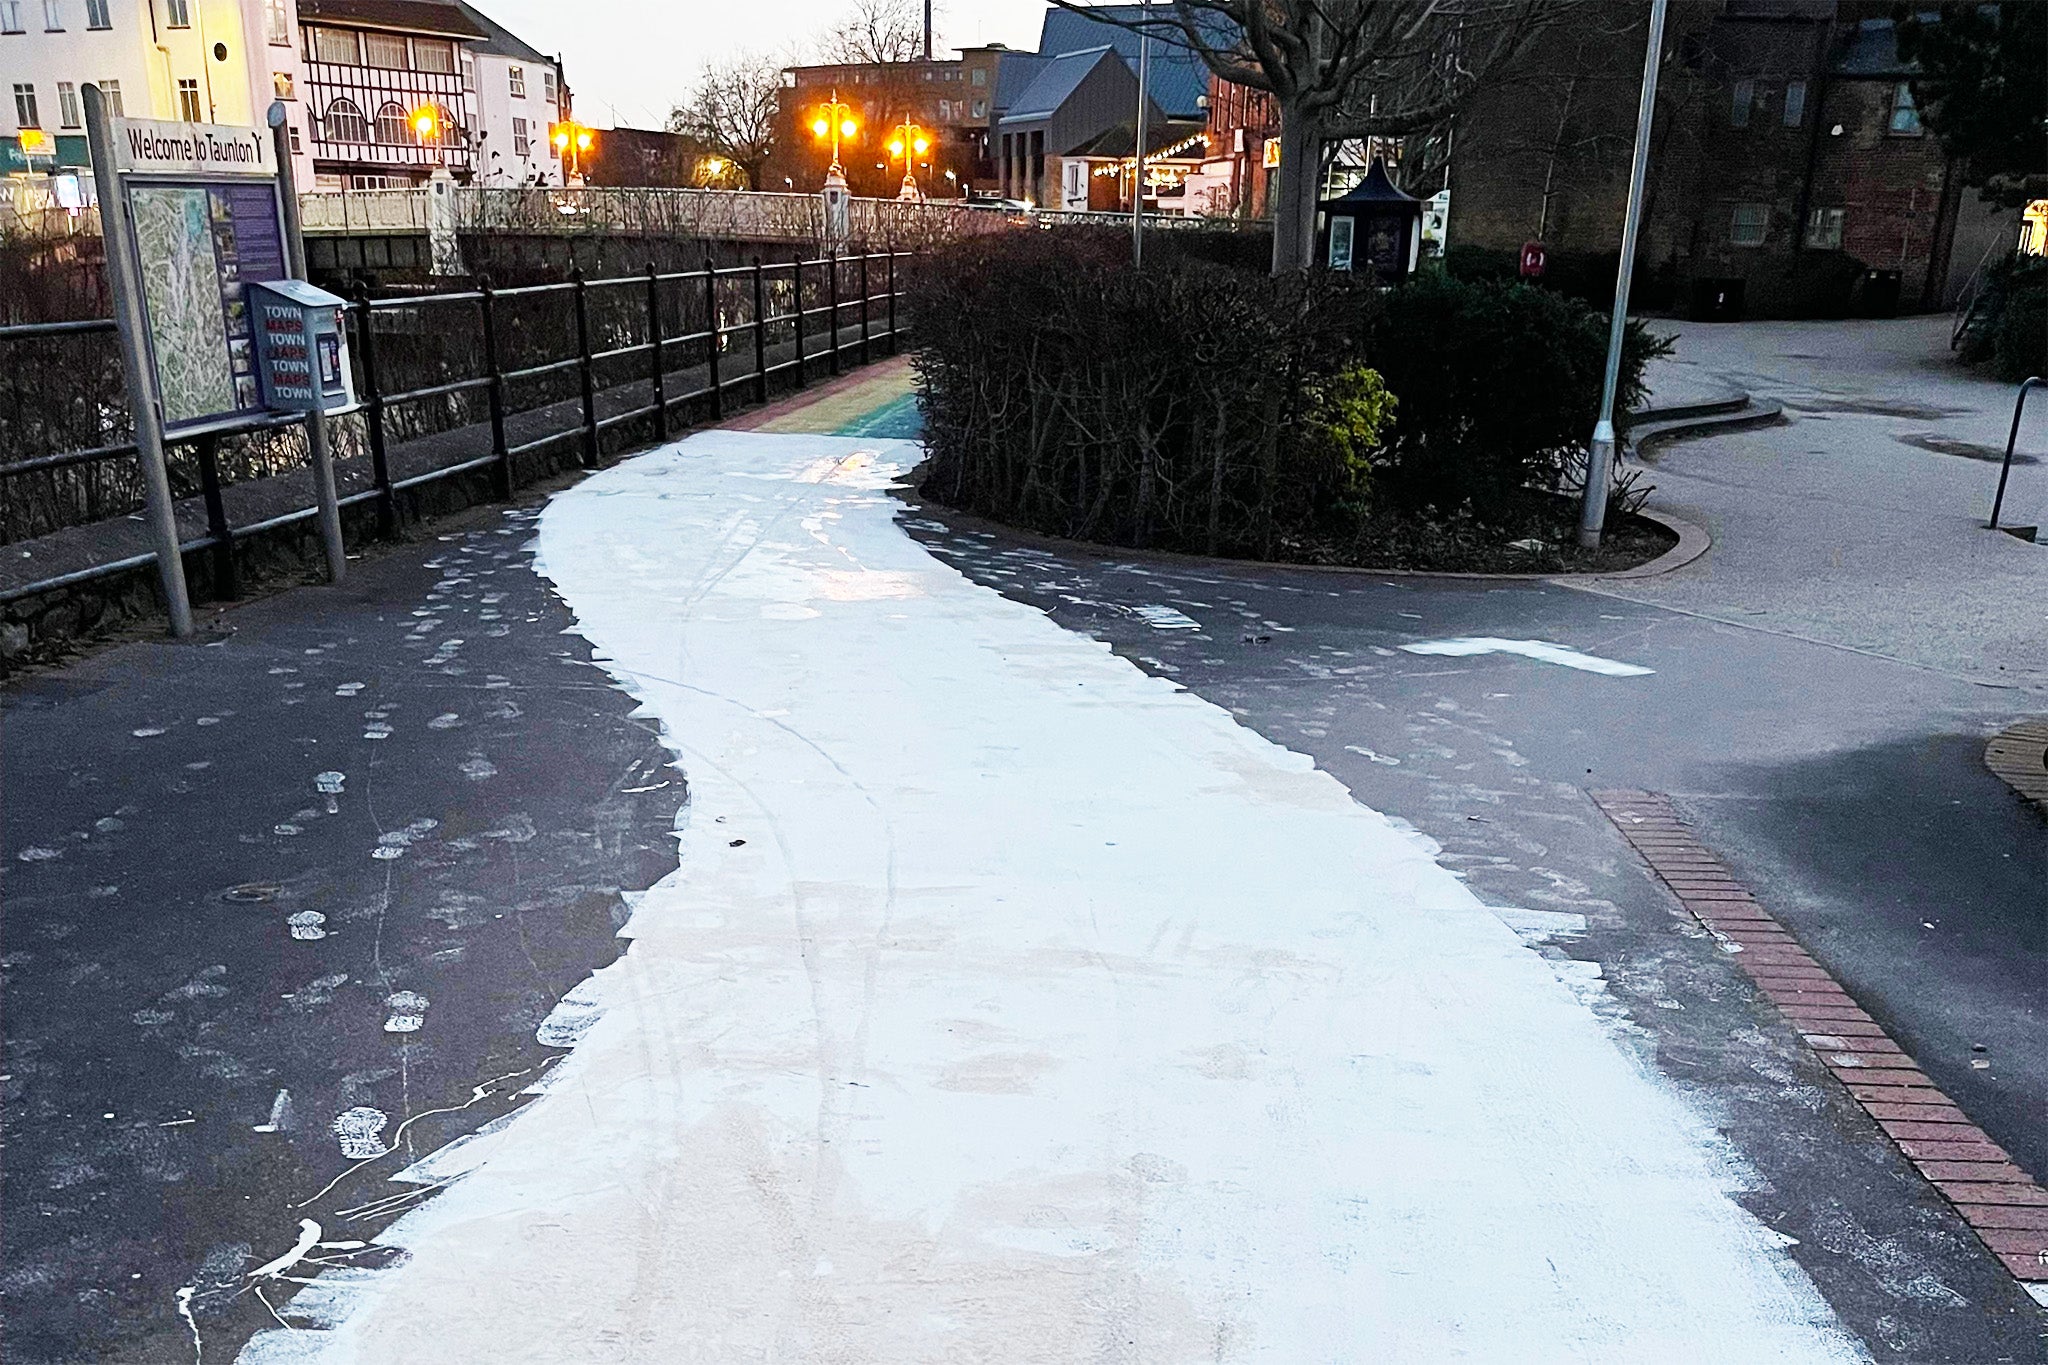 The path was covered in white paint on Thursday morning